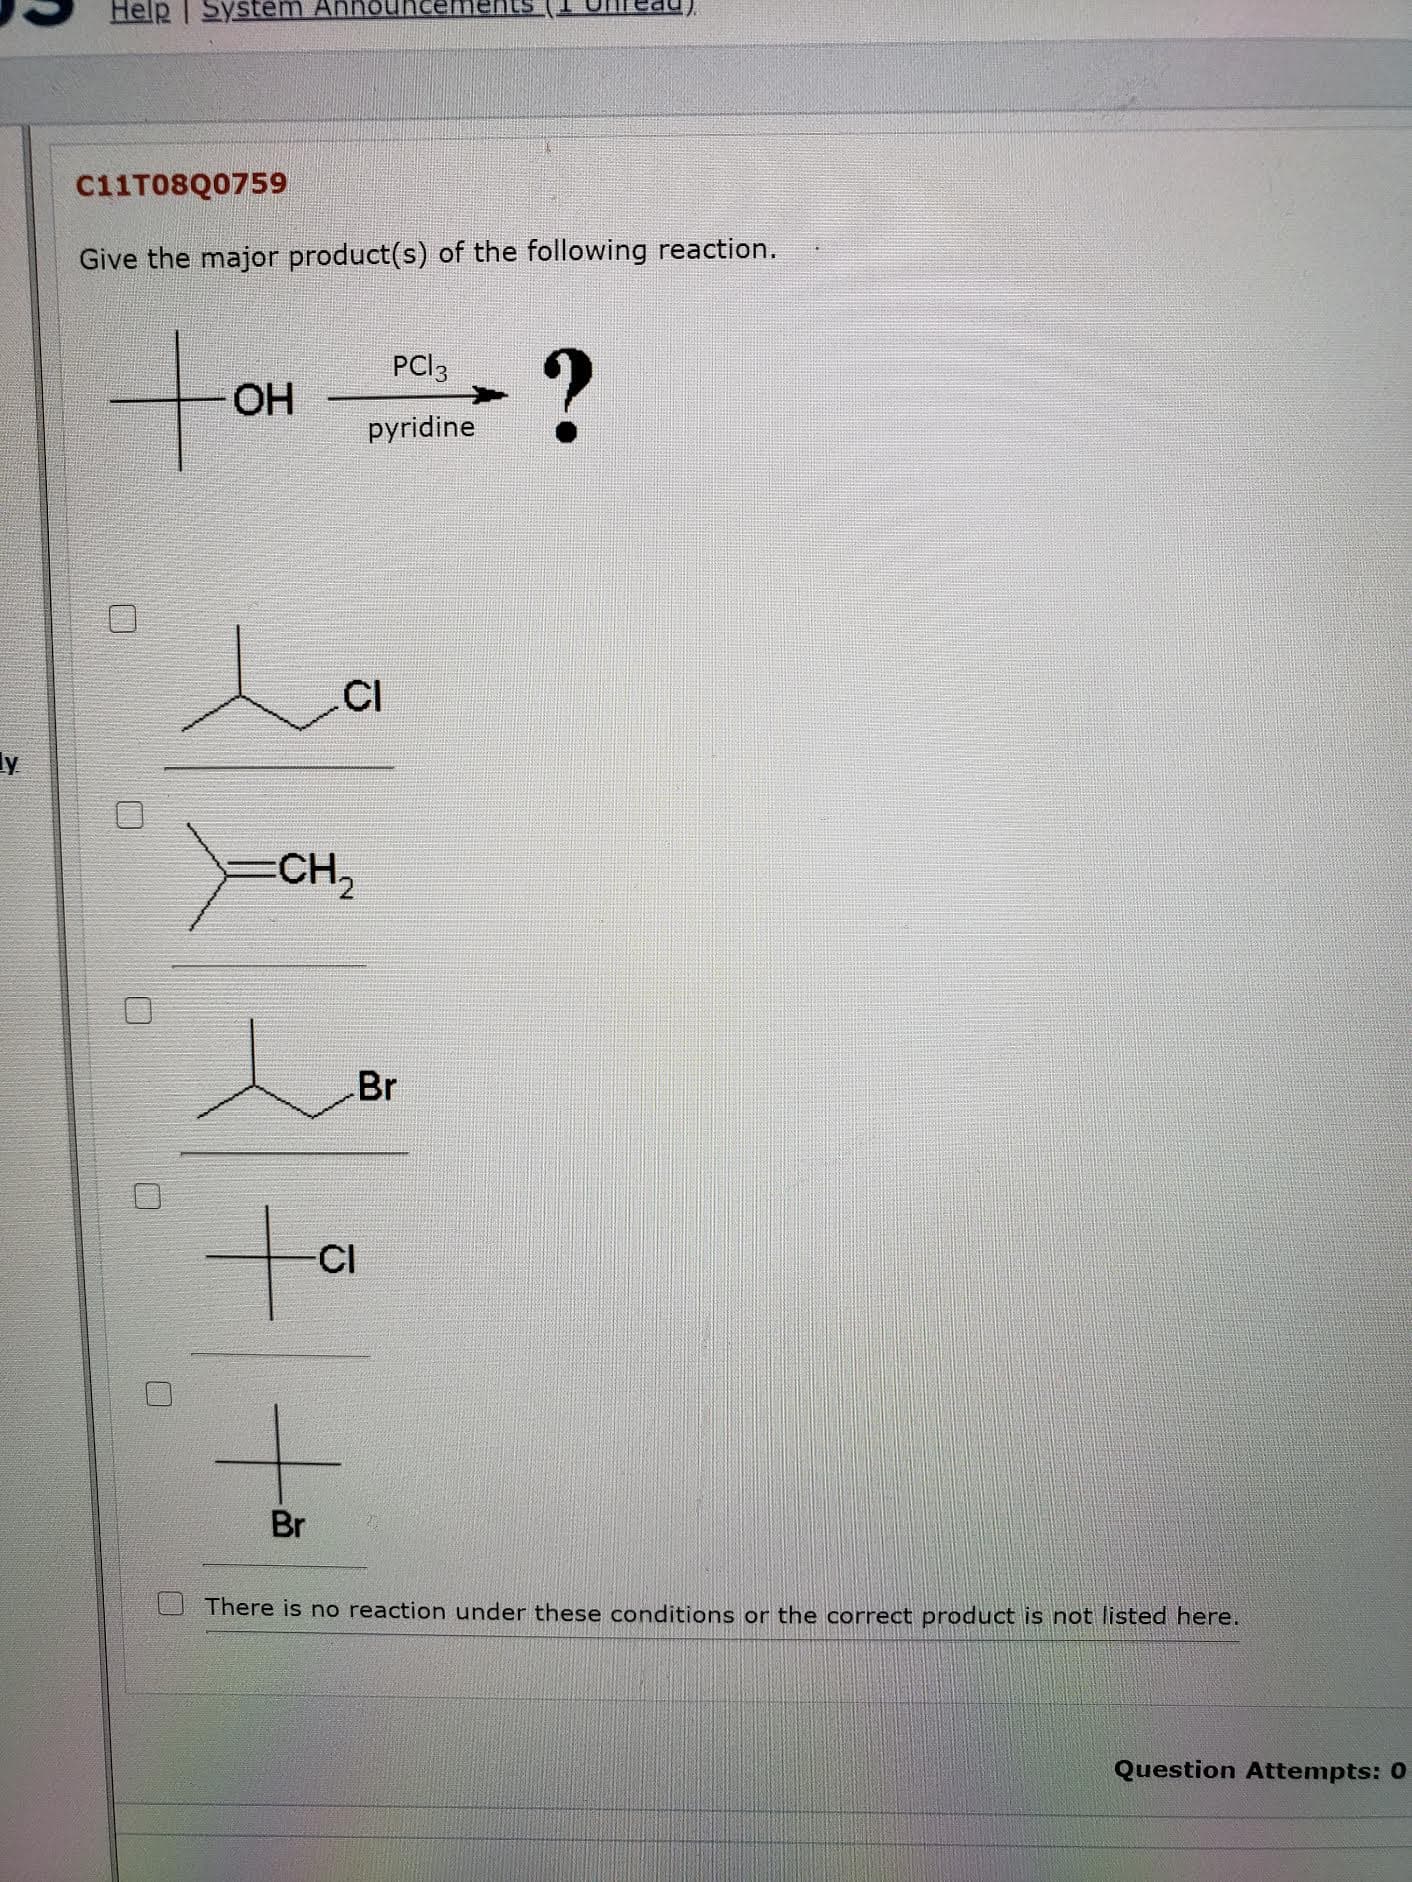 Give the major product(s) of the following reaction.
PCI3
OH
pyridine
CI
CH,
Br
to
CI
Br
